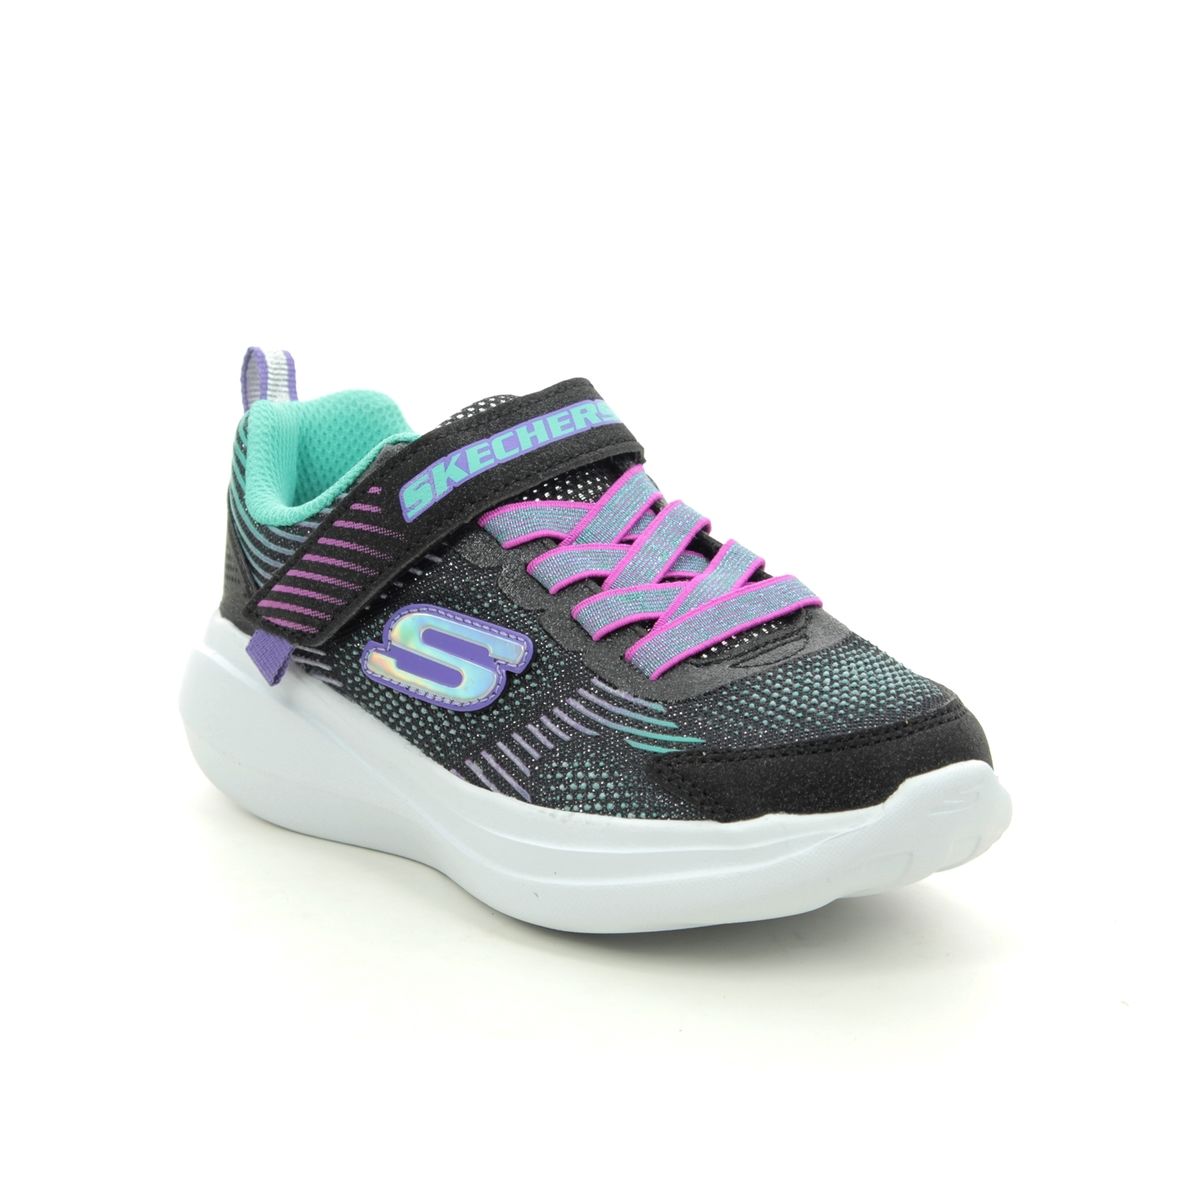 shoes with wheels skechers